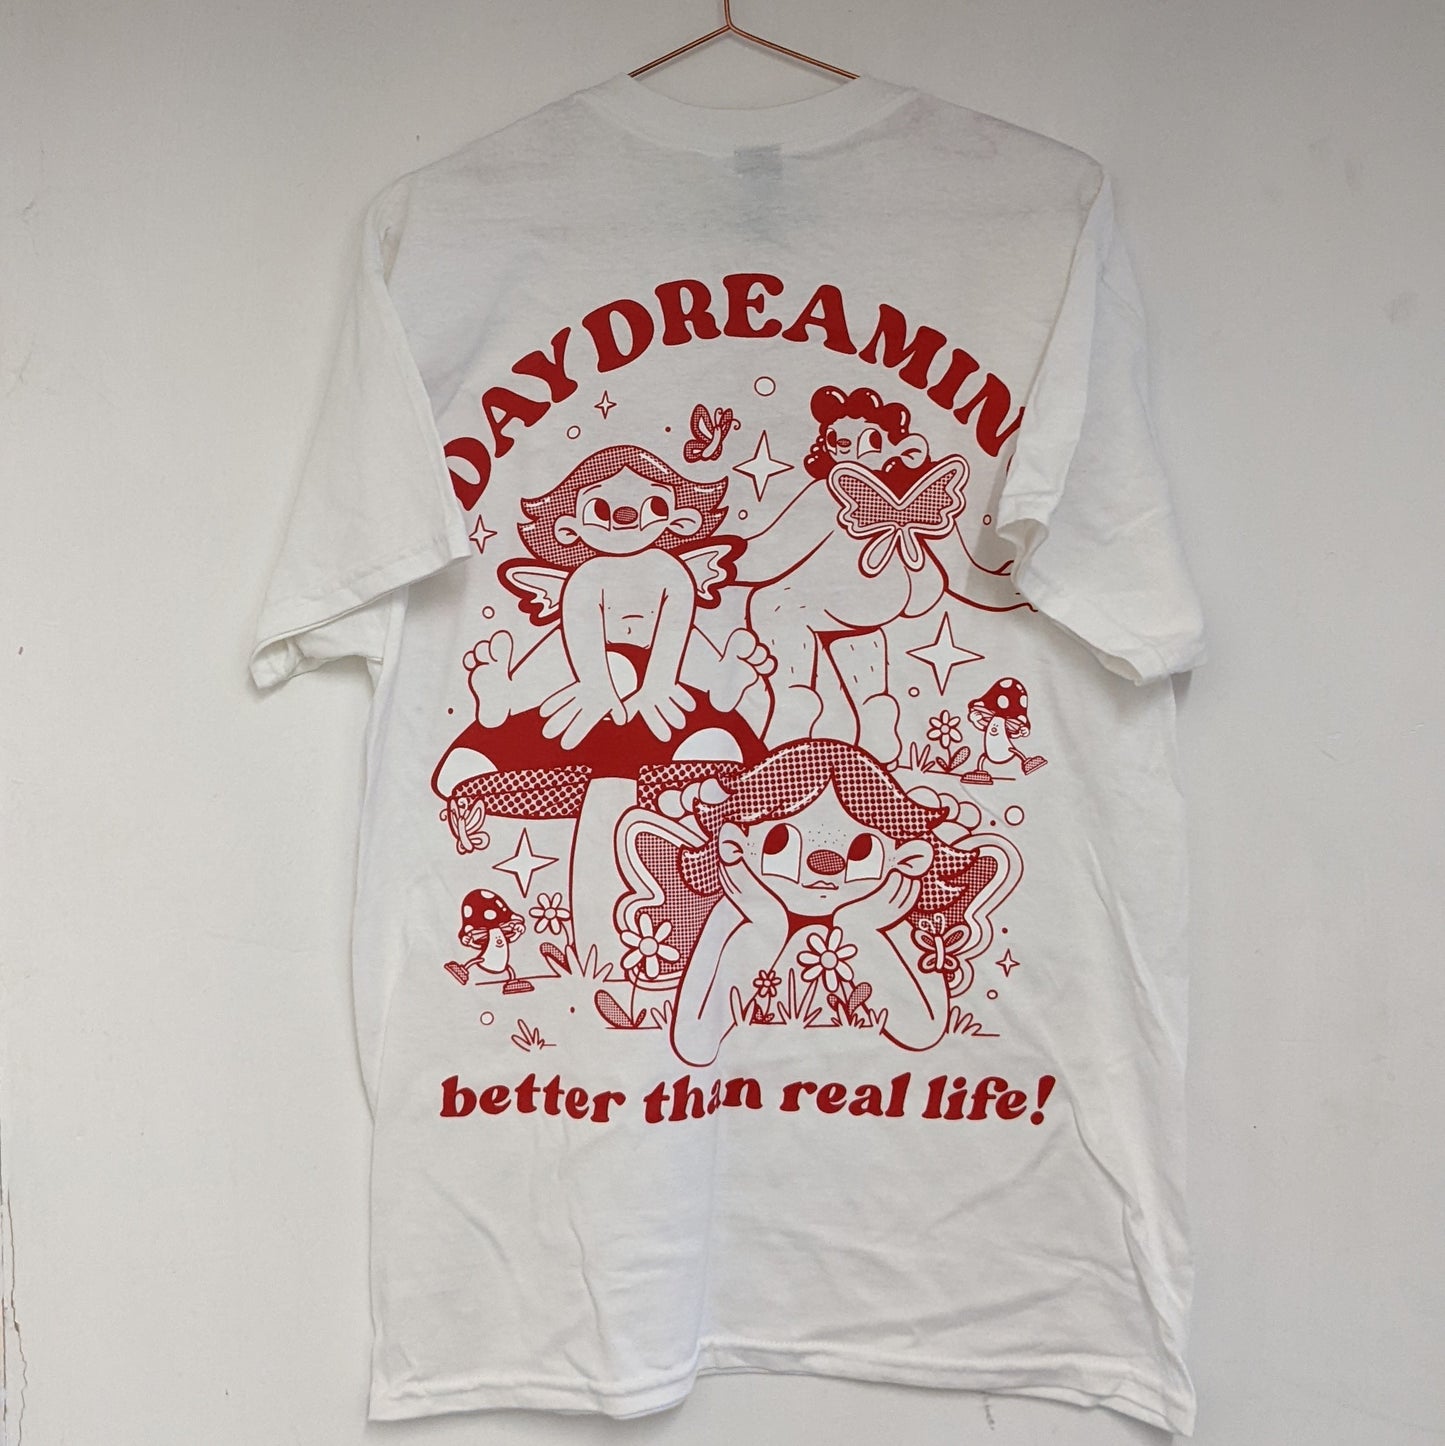 Daydreaming organic cottonT-shirt (X2 colours available)